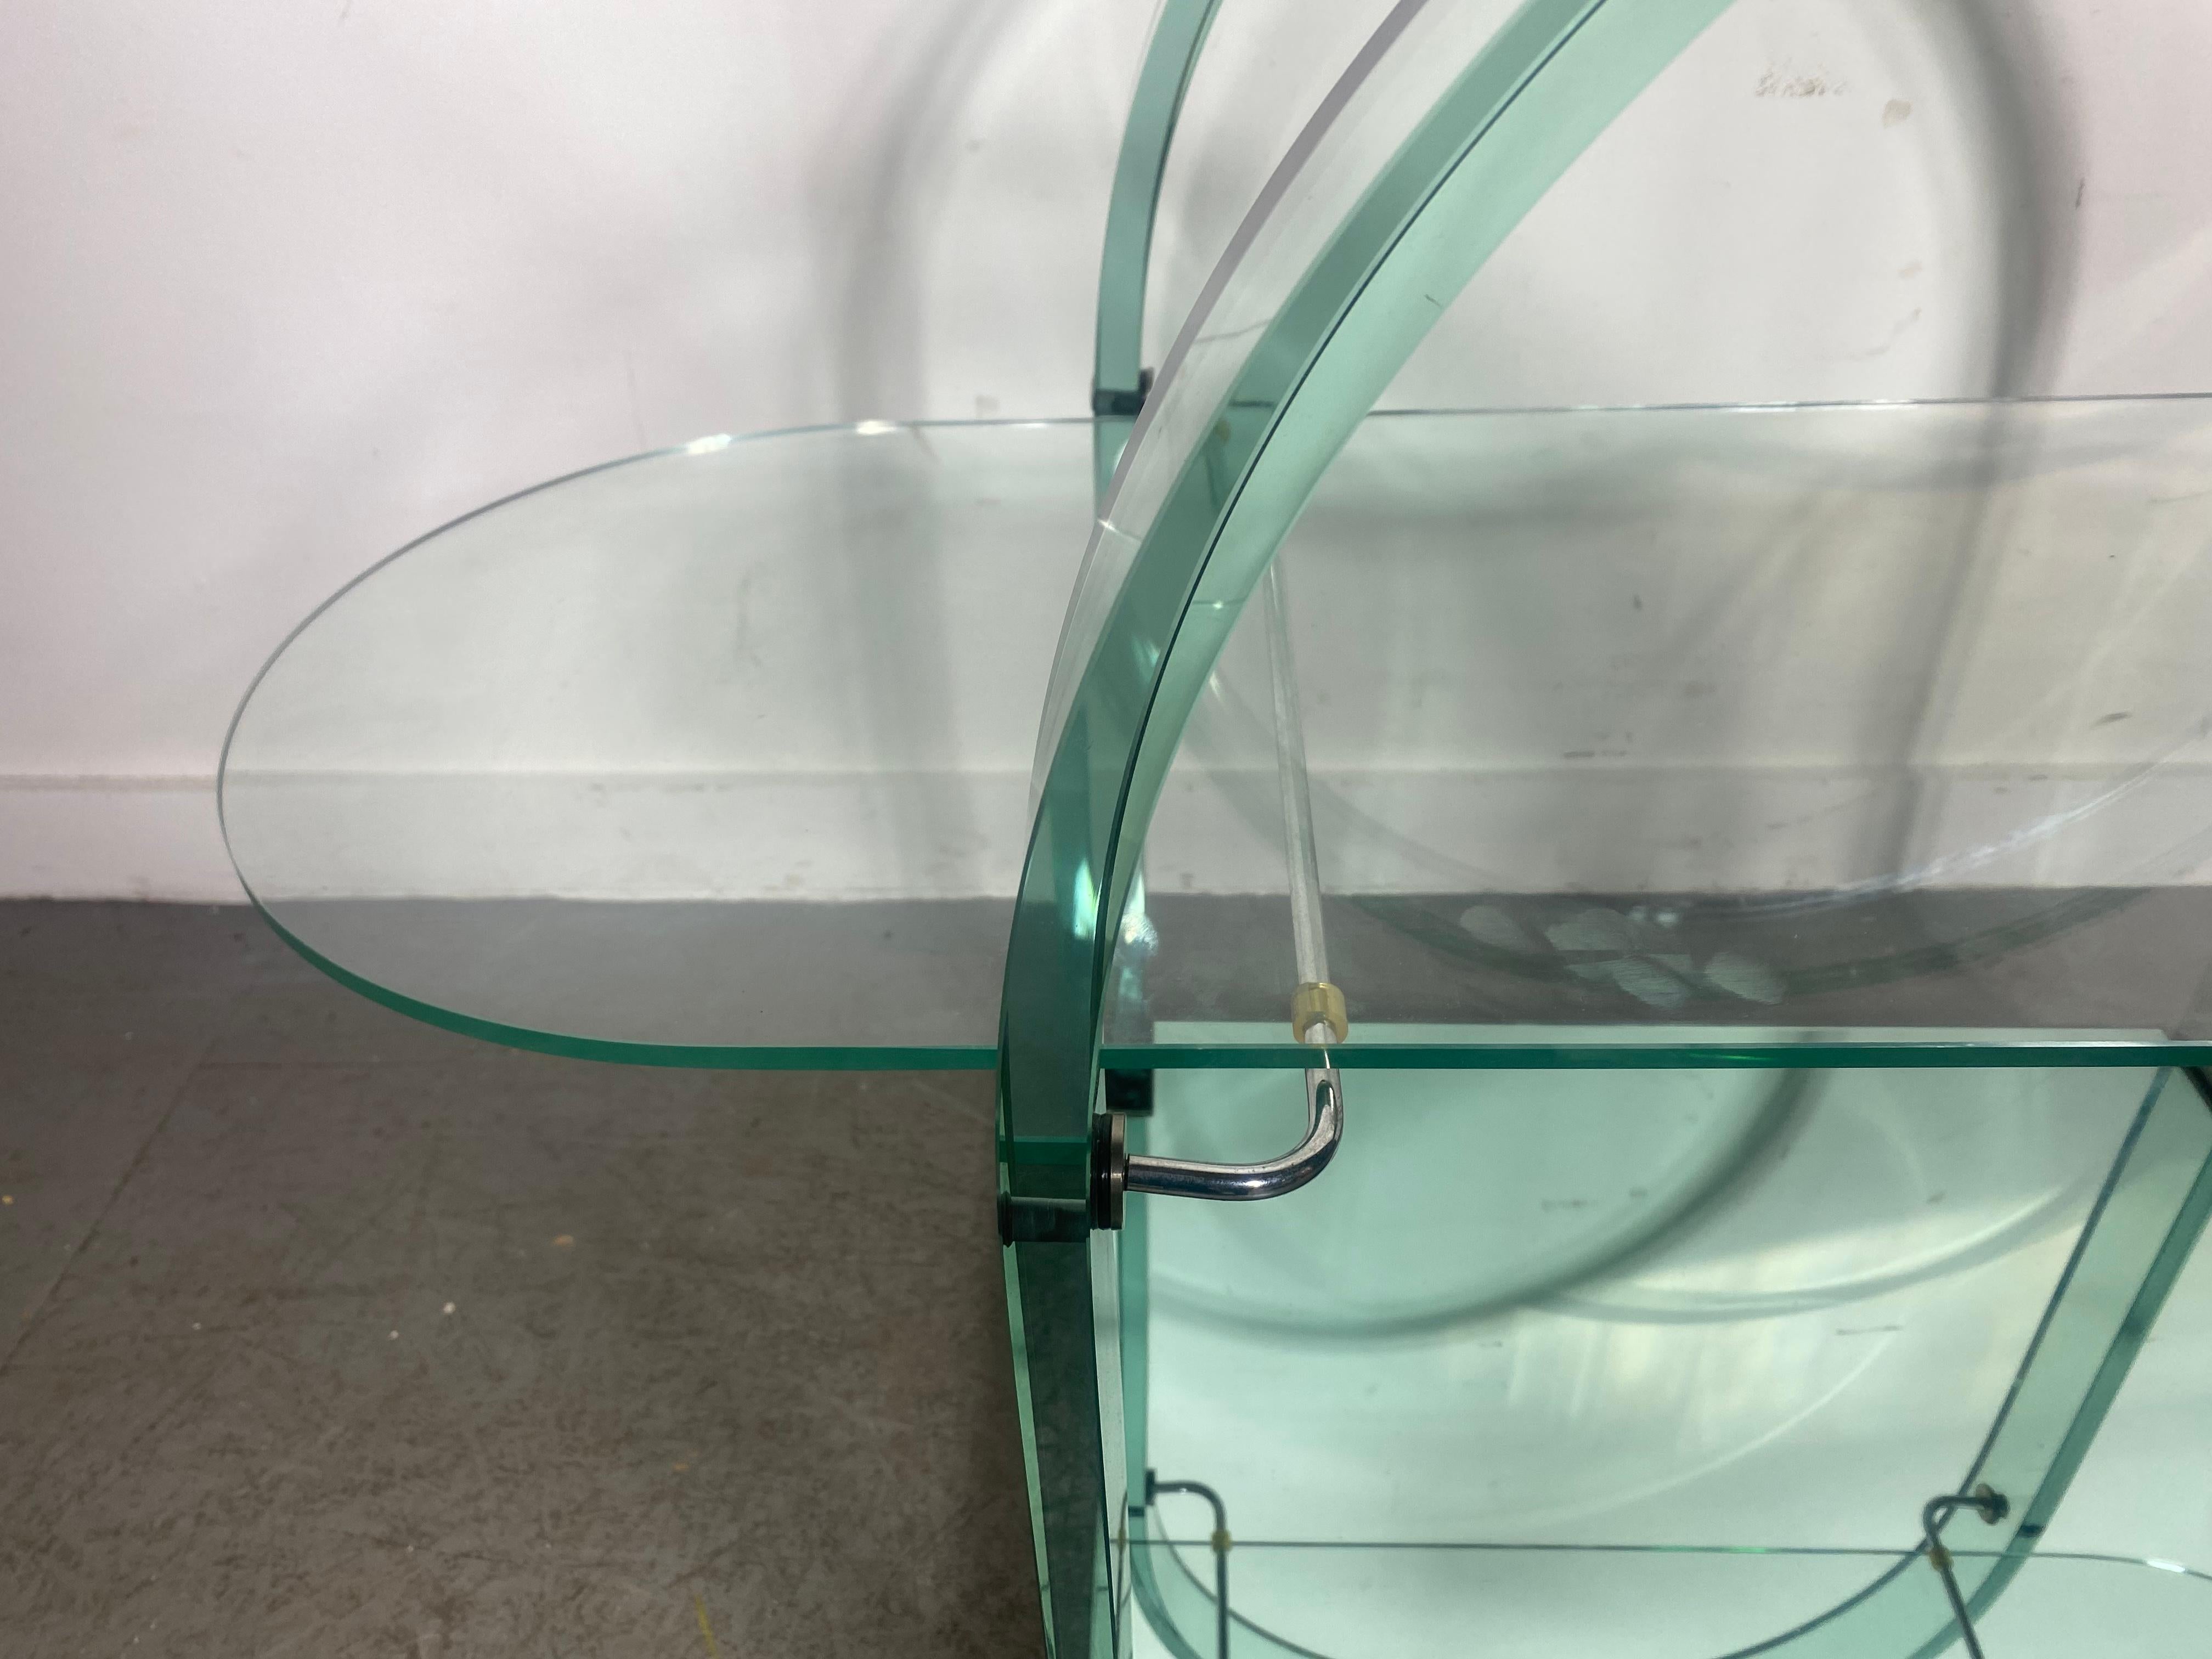 Late 20th Century Post Modernist Curved Glass + Mirrored Bar Cart by Fiam Italia, 1980s Memphis